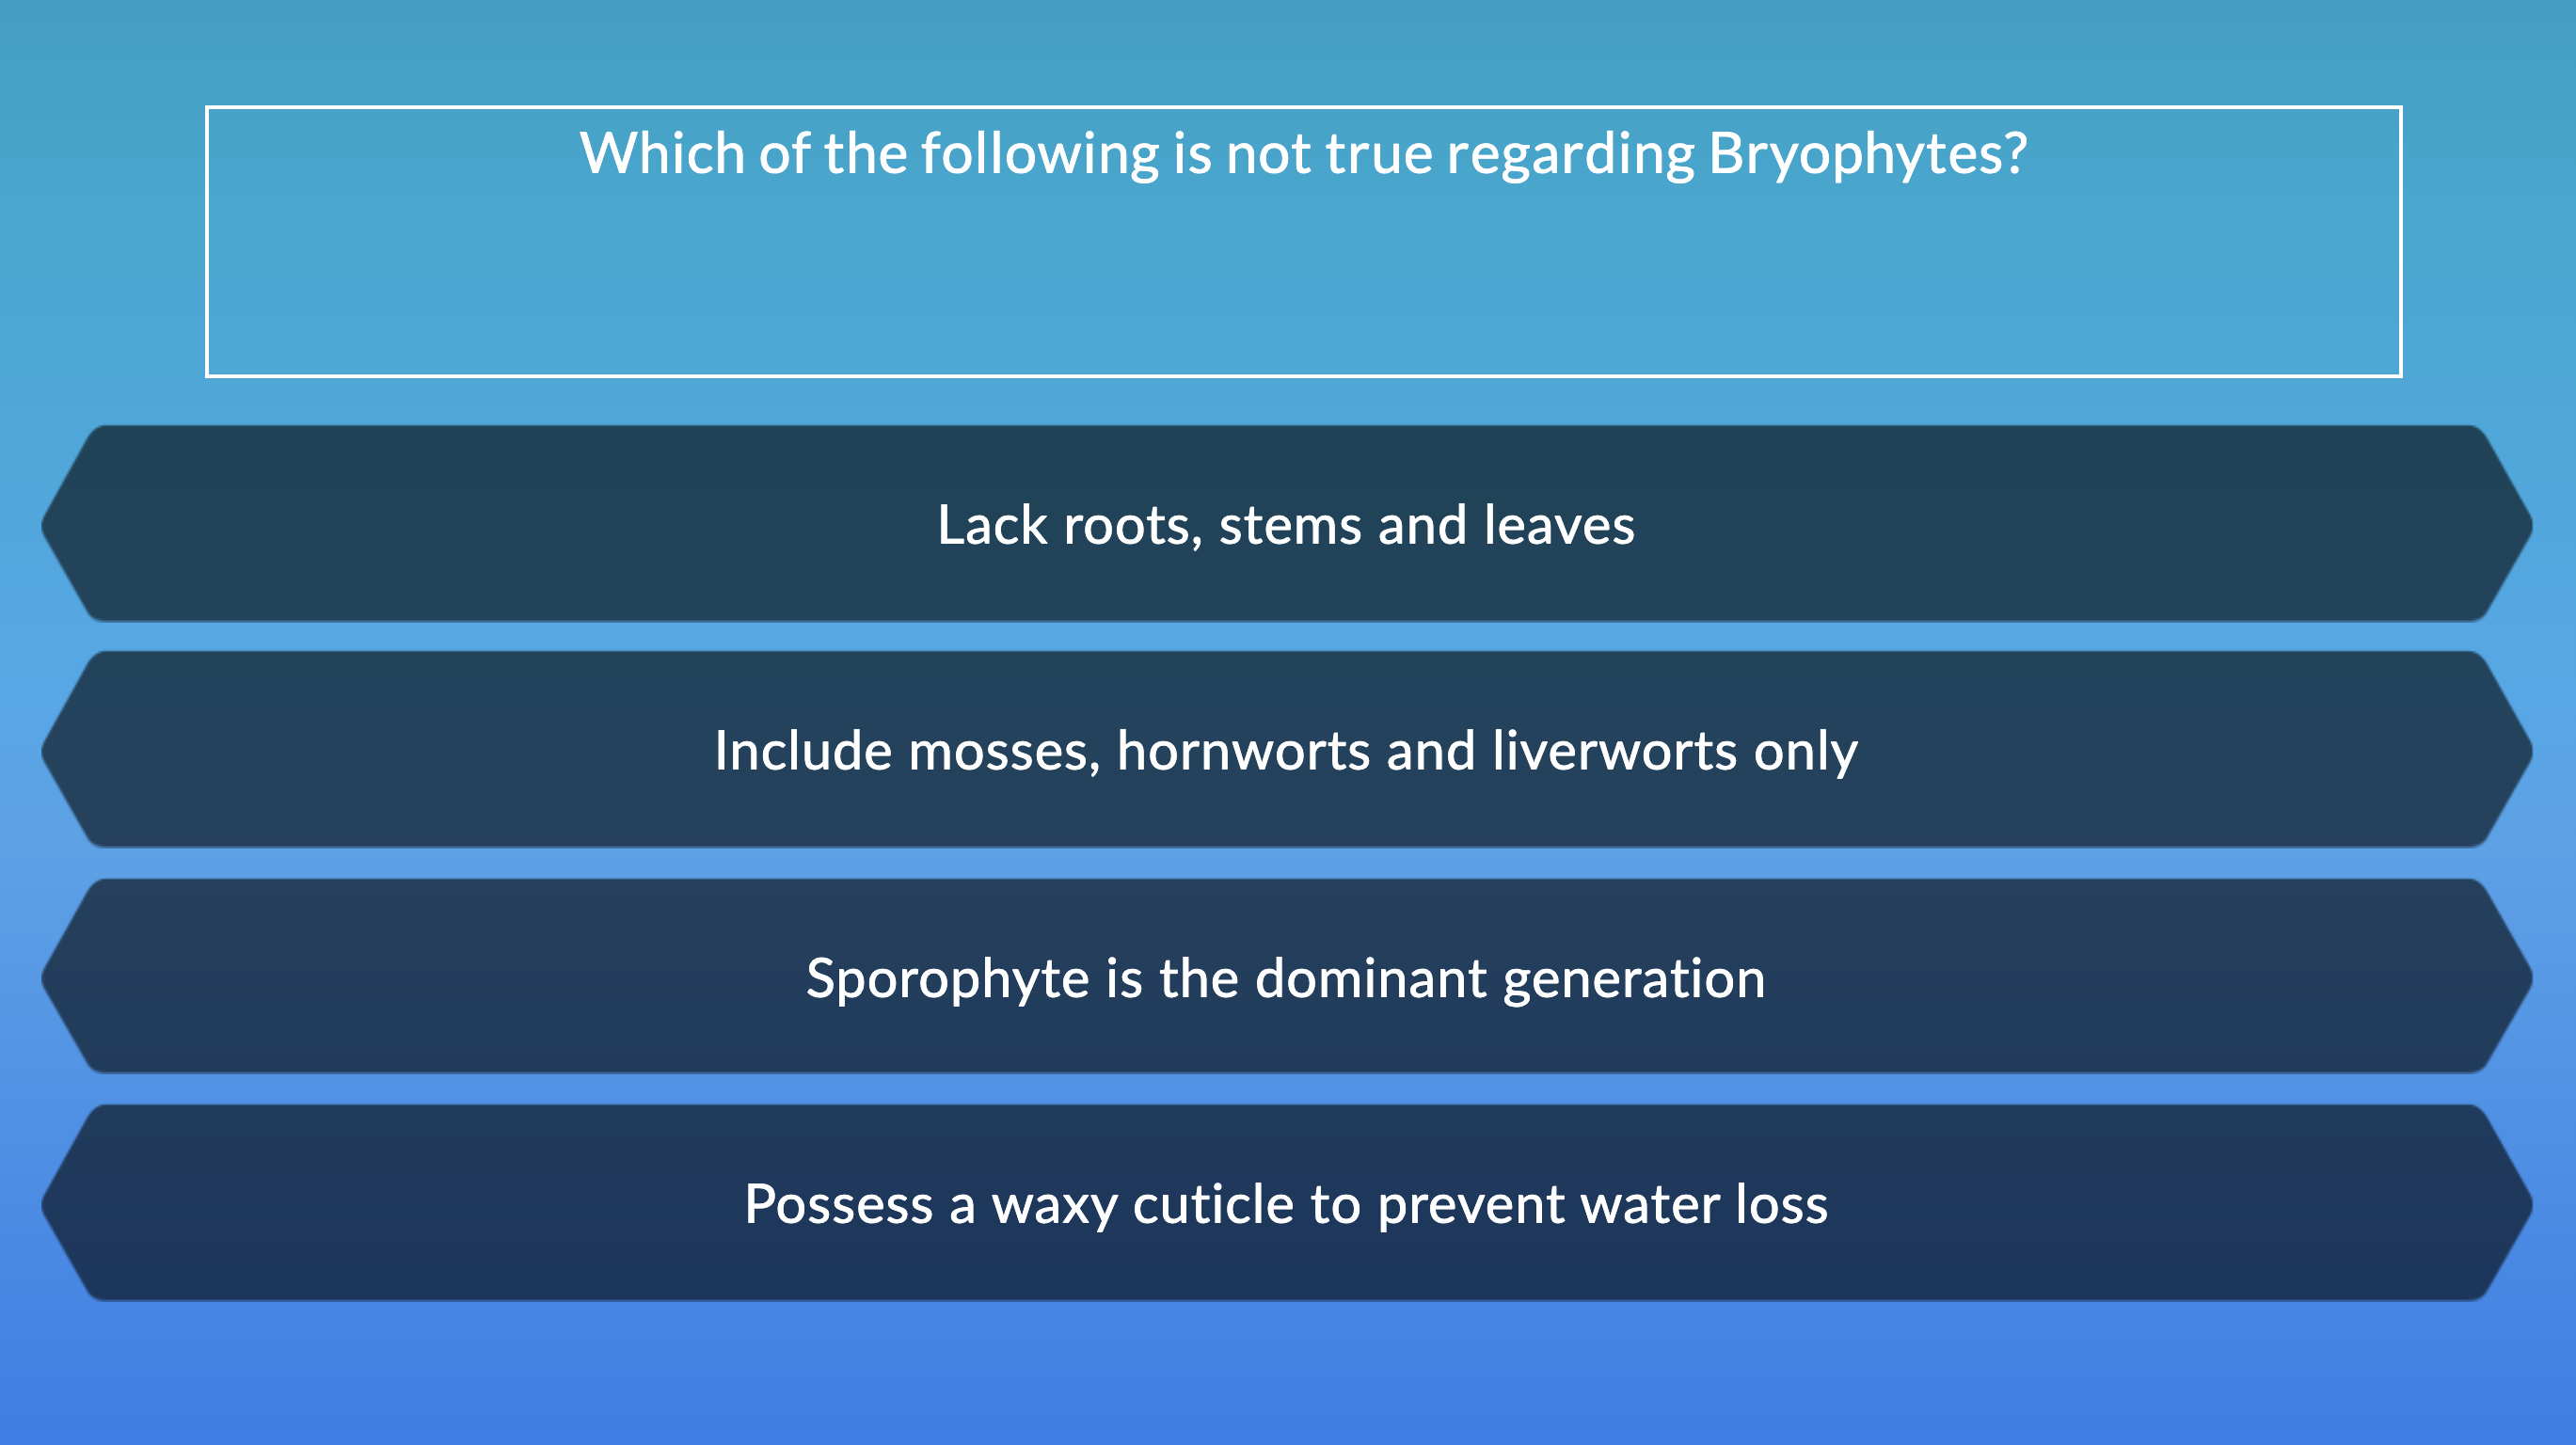 Which of the following is not true regarding Bryophytes?
Lack roots, stems and leaves
Include mosses, hornworts and liverworts only
Sporophyte is the dominant generation
Possess a waxy cuticle to prevent water loss
